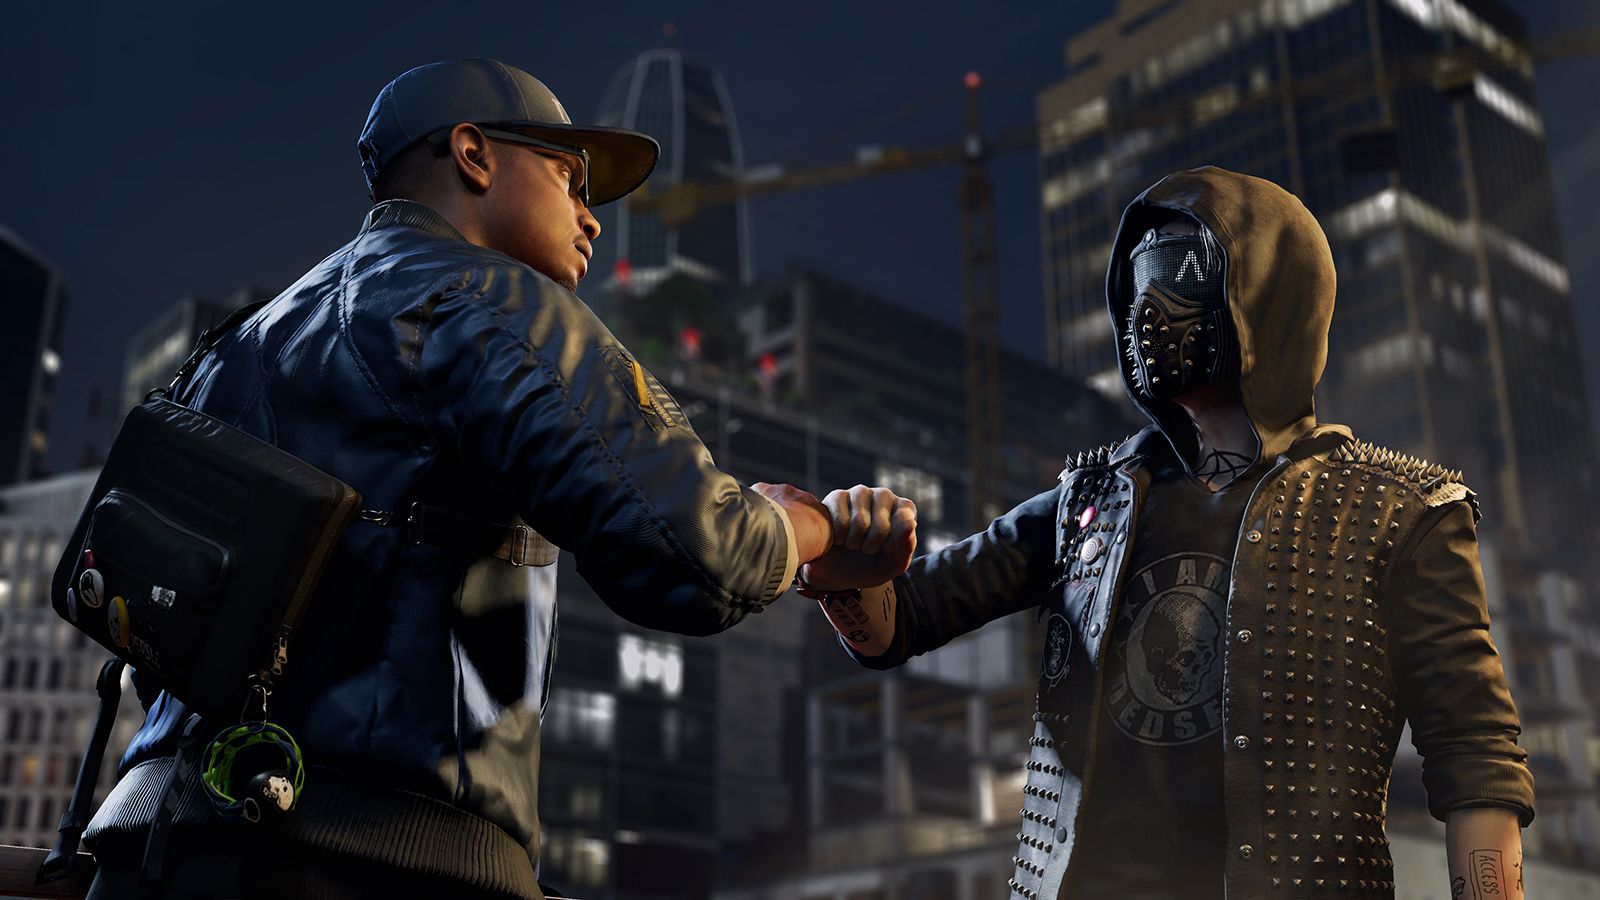 watch dogs 2 review image 18